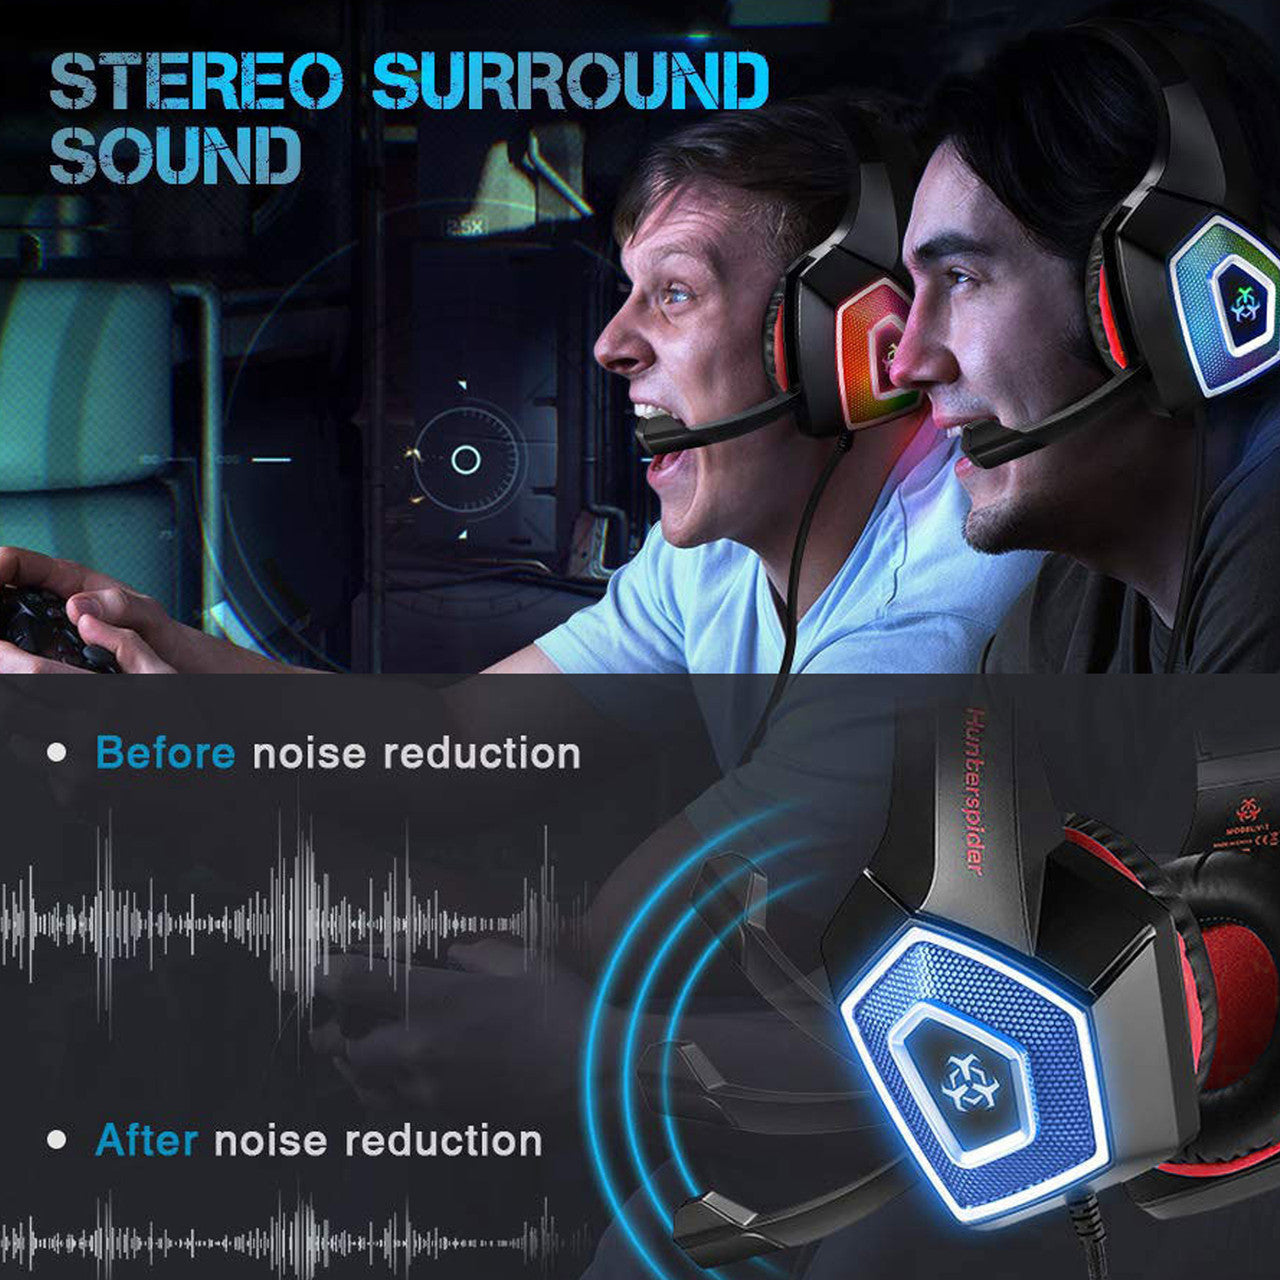 Gaming Headset with Mic Bass Noise Canceling 7 LED Soft Earmuffs, for Xbox PC Nintendo Switch